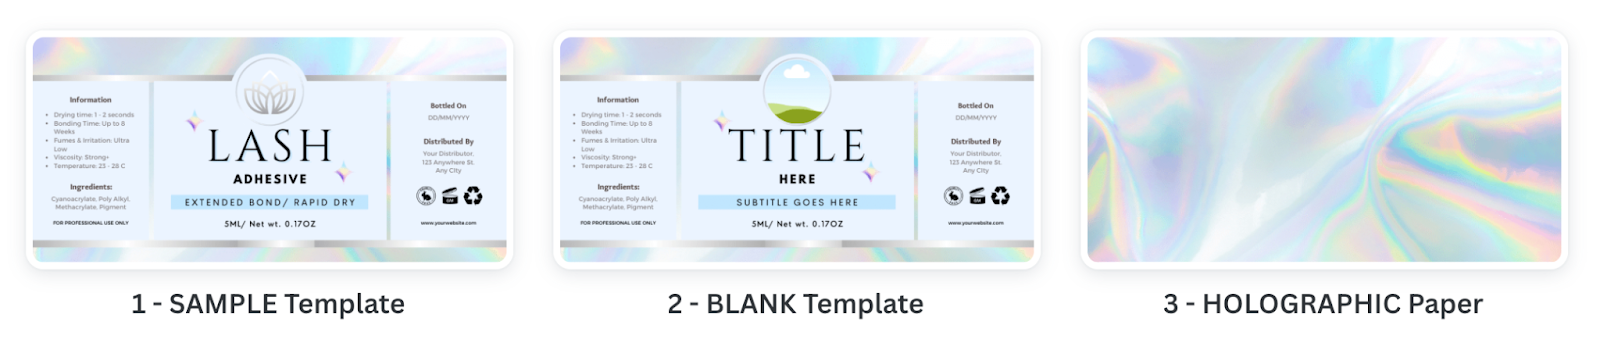 Canva Digital Template Design To Sell On Etsy | Smartiac